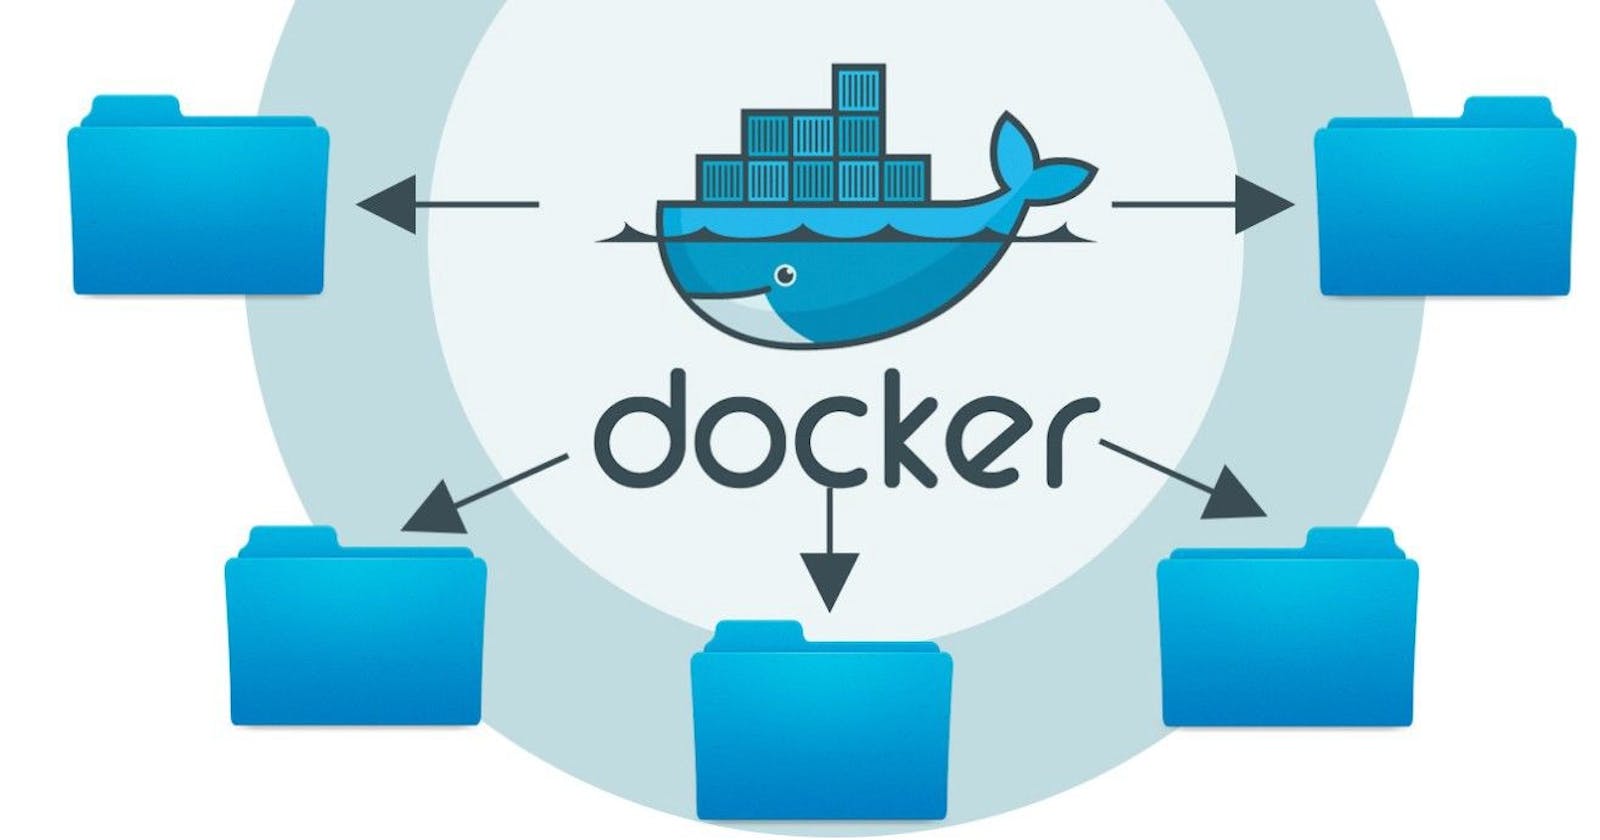 Everything you need from Docker in your projects